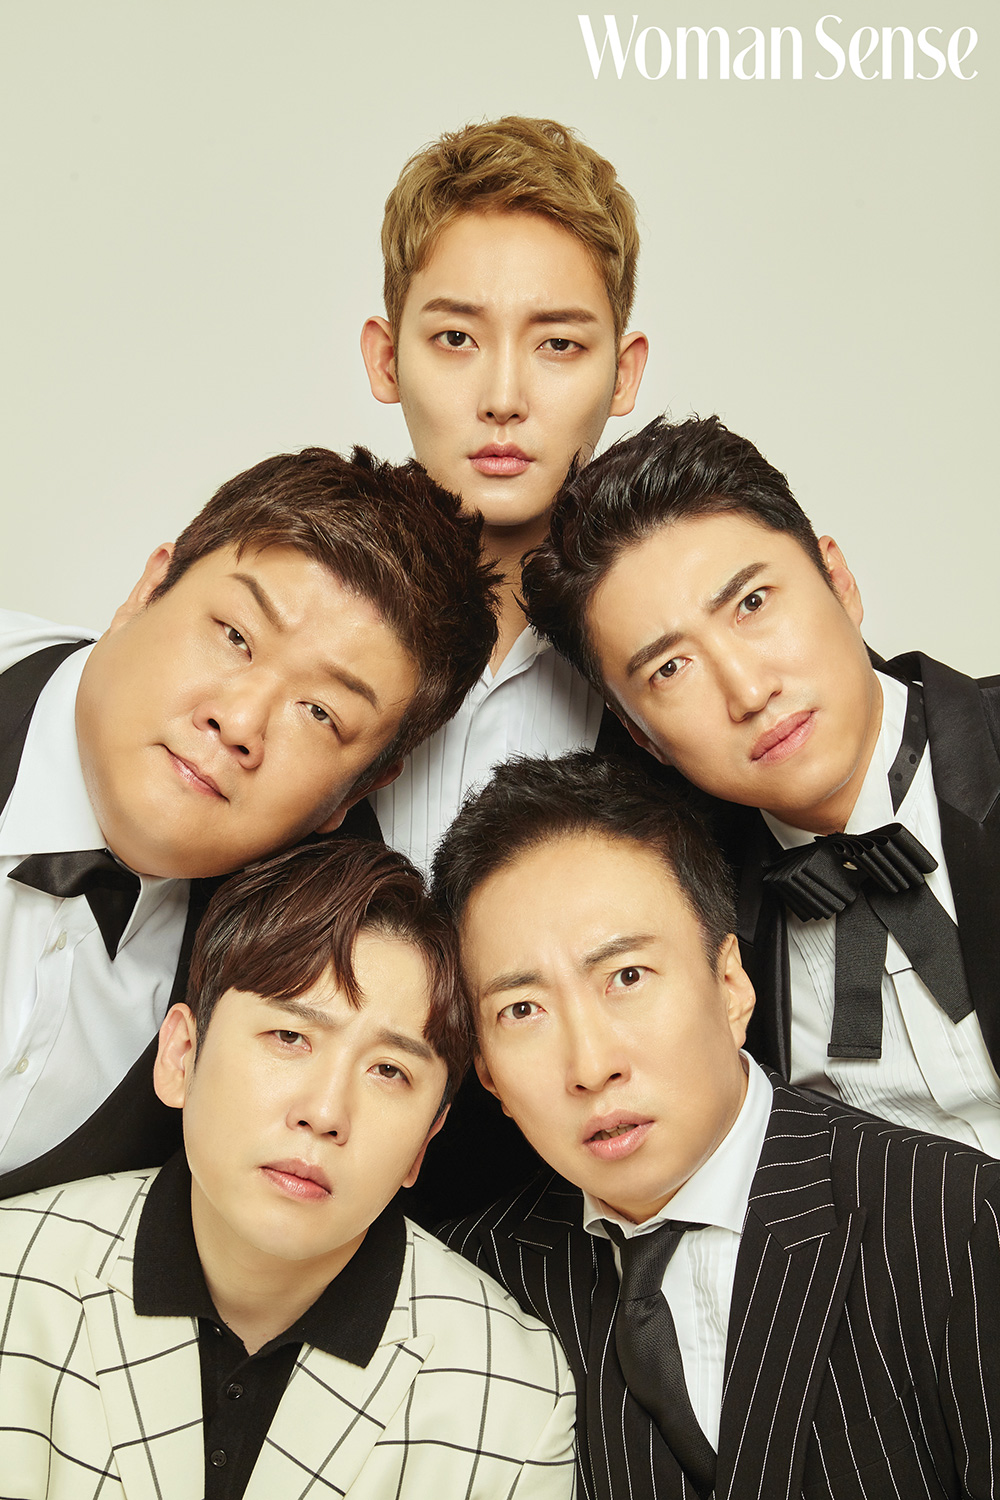 The monthly magazine Hanuman essence released interviews with the pictures of Park Myeong-su, Jang Dong-min, Yu Minsang, Nam Chang-hee and Park Hyung-geun, who are appearing on MBN Loveless Men (hereinafter Pond Man).Pond Nam is an entertainment program where men who can not love gather to think about and study why we can not love.In an interview after filming, Jang Dong-min said, I am 30 points when asked about the love score this year. I think it is not enough to work and love because I set my goal.It has become a difficult world to meet someone easily, he confessed, and after the breakup, Im afraid of how Ill be seen.Nam Chang-hee said, I do not have effort or thumb, so I do not have a point. He explained why he was not able to dash to reason as well as to fight with a long love gap.On the other hand, Yu Minsang said, I am older and understanding is important. In the past, Game favorite woman was ideal, but now I like a woman who understands me likes Game.In addition, he expressed his desire to be an example of many pond men in the whole country after Ok Dongja - Oh Ji Heon.Finally, Park Myeong-su, who is working as a Love Coach for Pond Men, pointed out Yang Se-chan, Jo Se-ho, and Lee Jin-ho as a fellow comedian who wants to recruit, and laughed, Friends who need external make-over and various love studies.On the other hand, their various real love challengers for solo escape MBN entertainment Loveless Men are broadcast every Wednesday night at 12:30 pm.Photo = Hanman essence